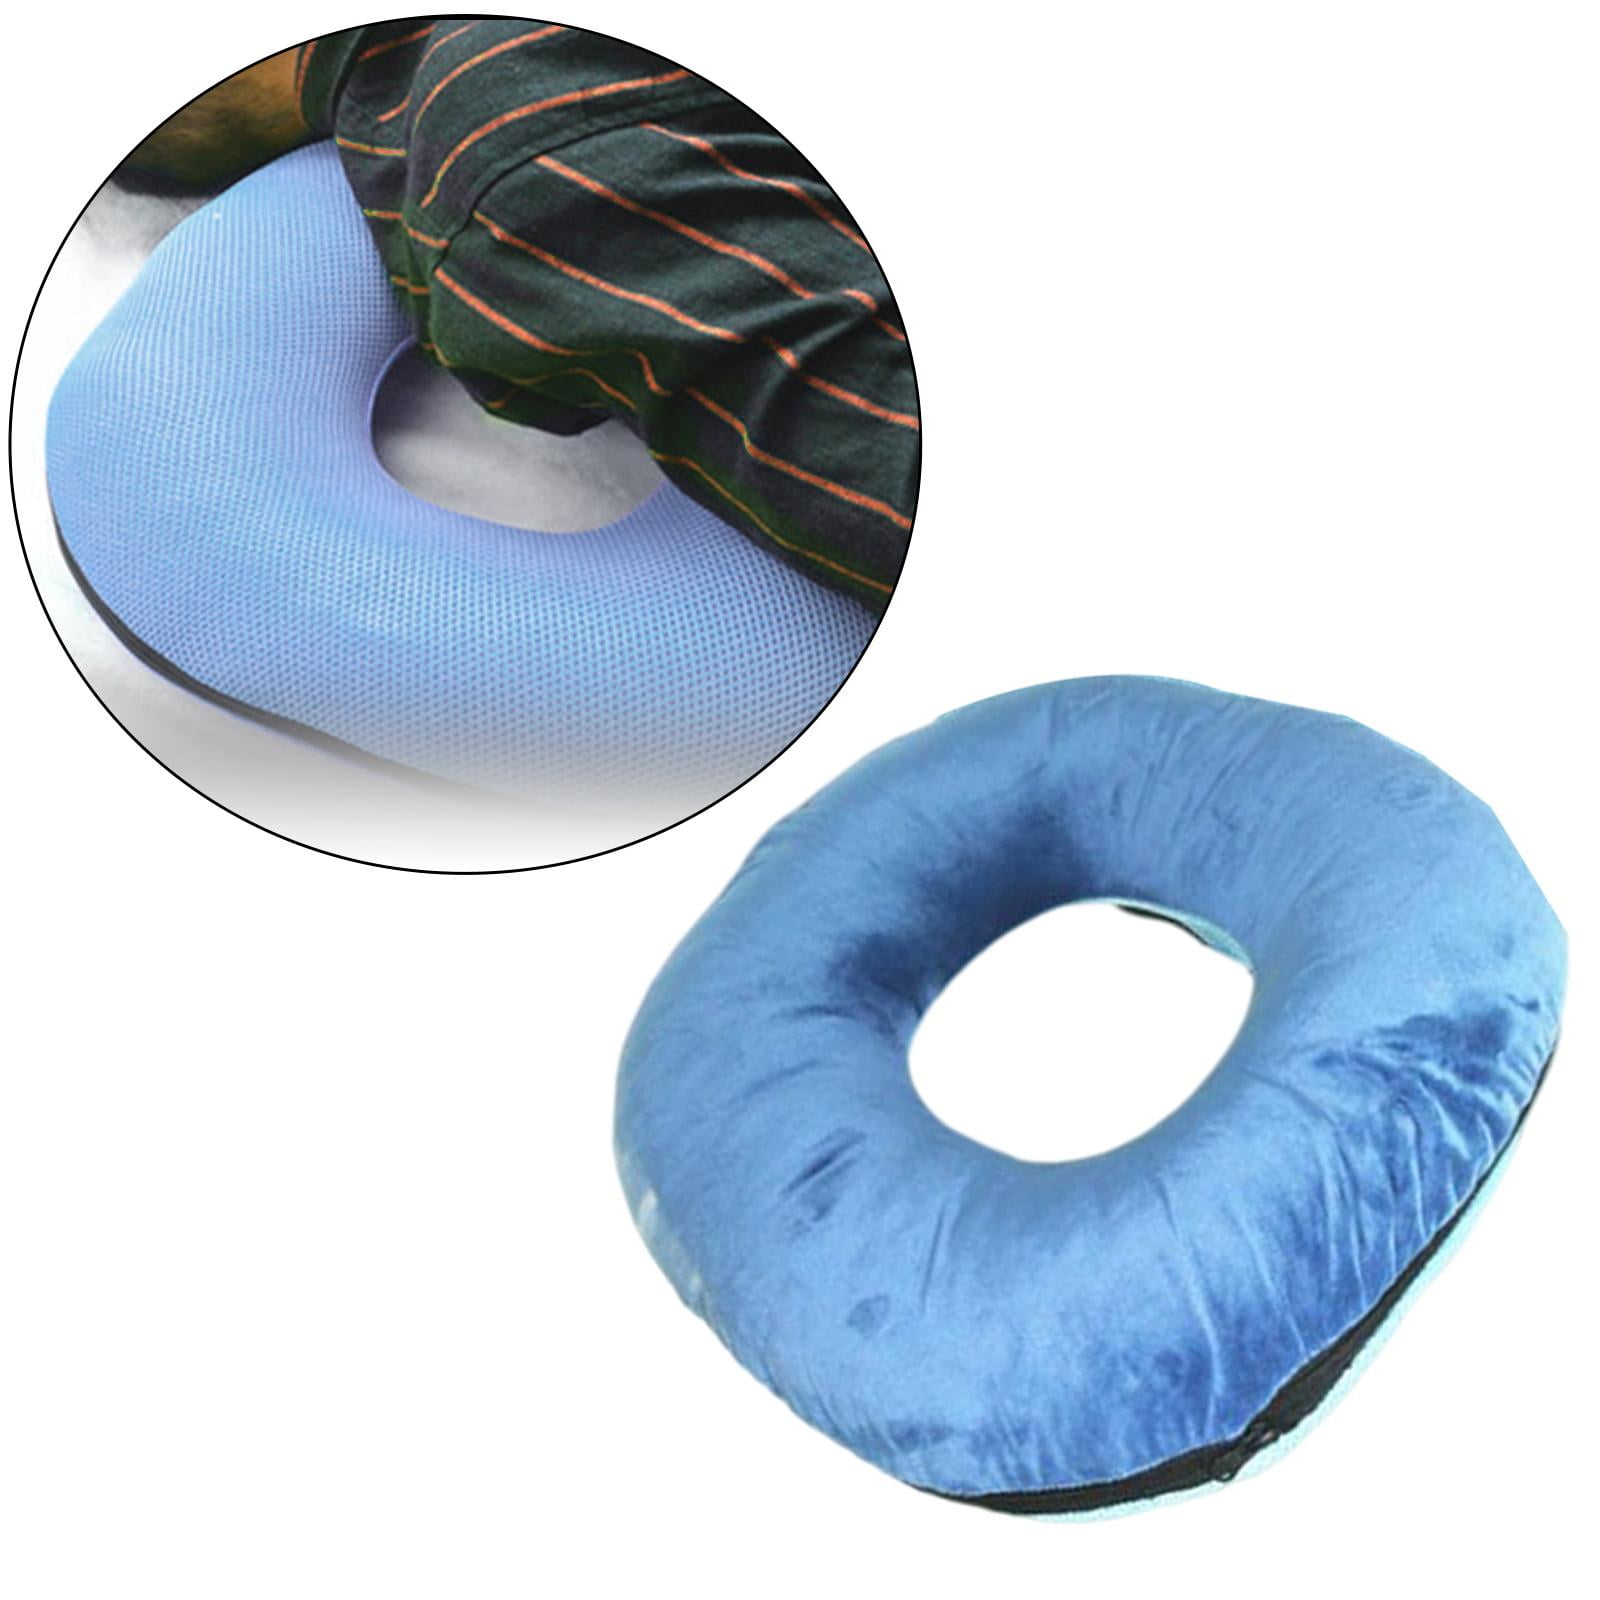 Minicloss Inflatable Donut Cushion, Elderly Nursing Anti-Bedsore Seat Pad  Hemorrhoids Seat Pillow, Tailbone Pain, for Wheelchairs Toilet Chair for  Home, Car, Office 